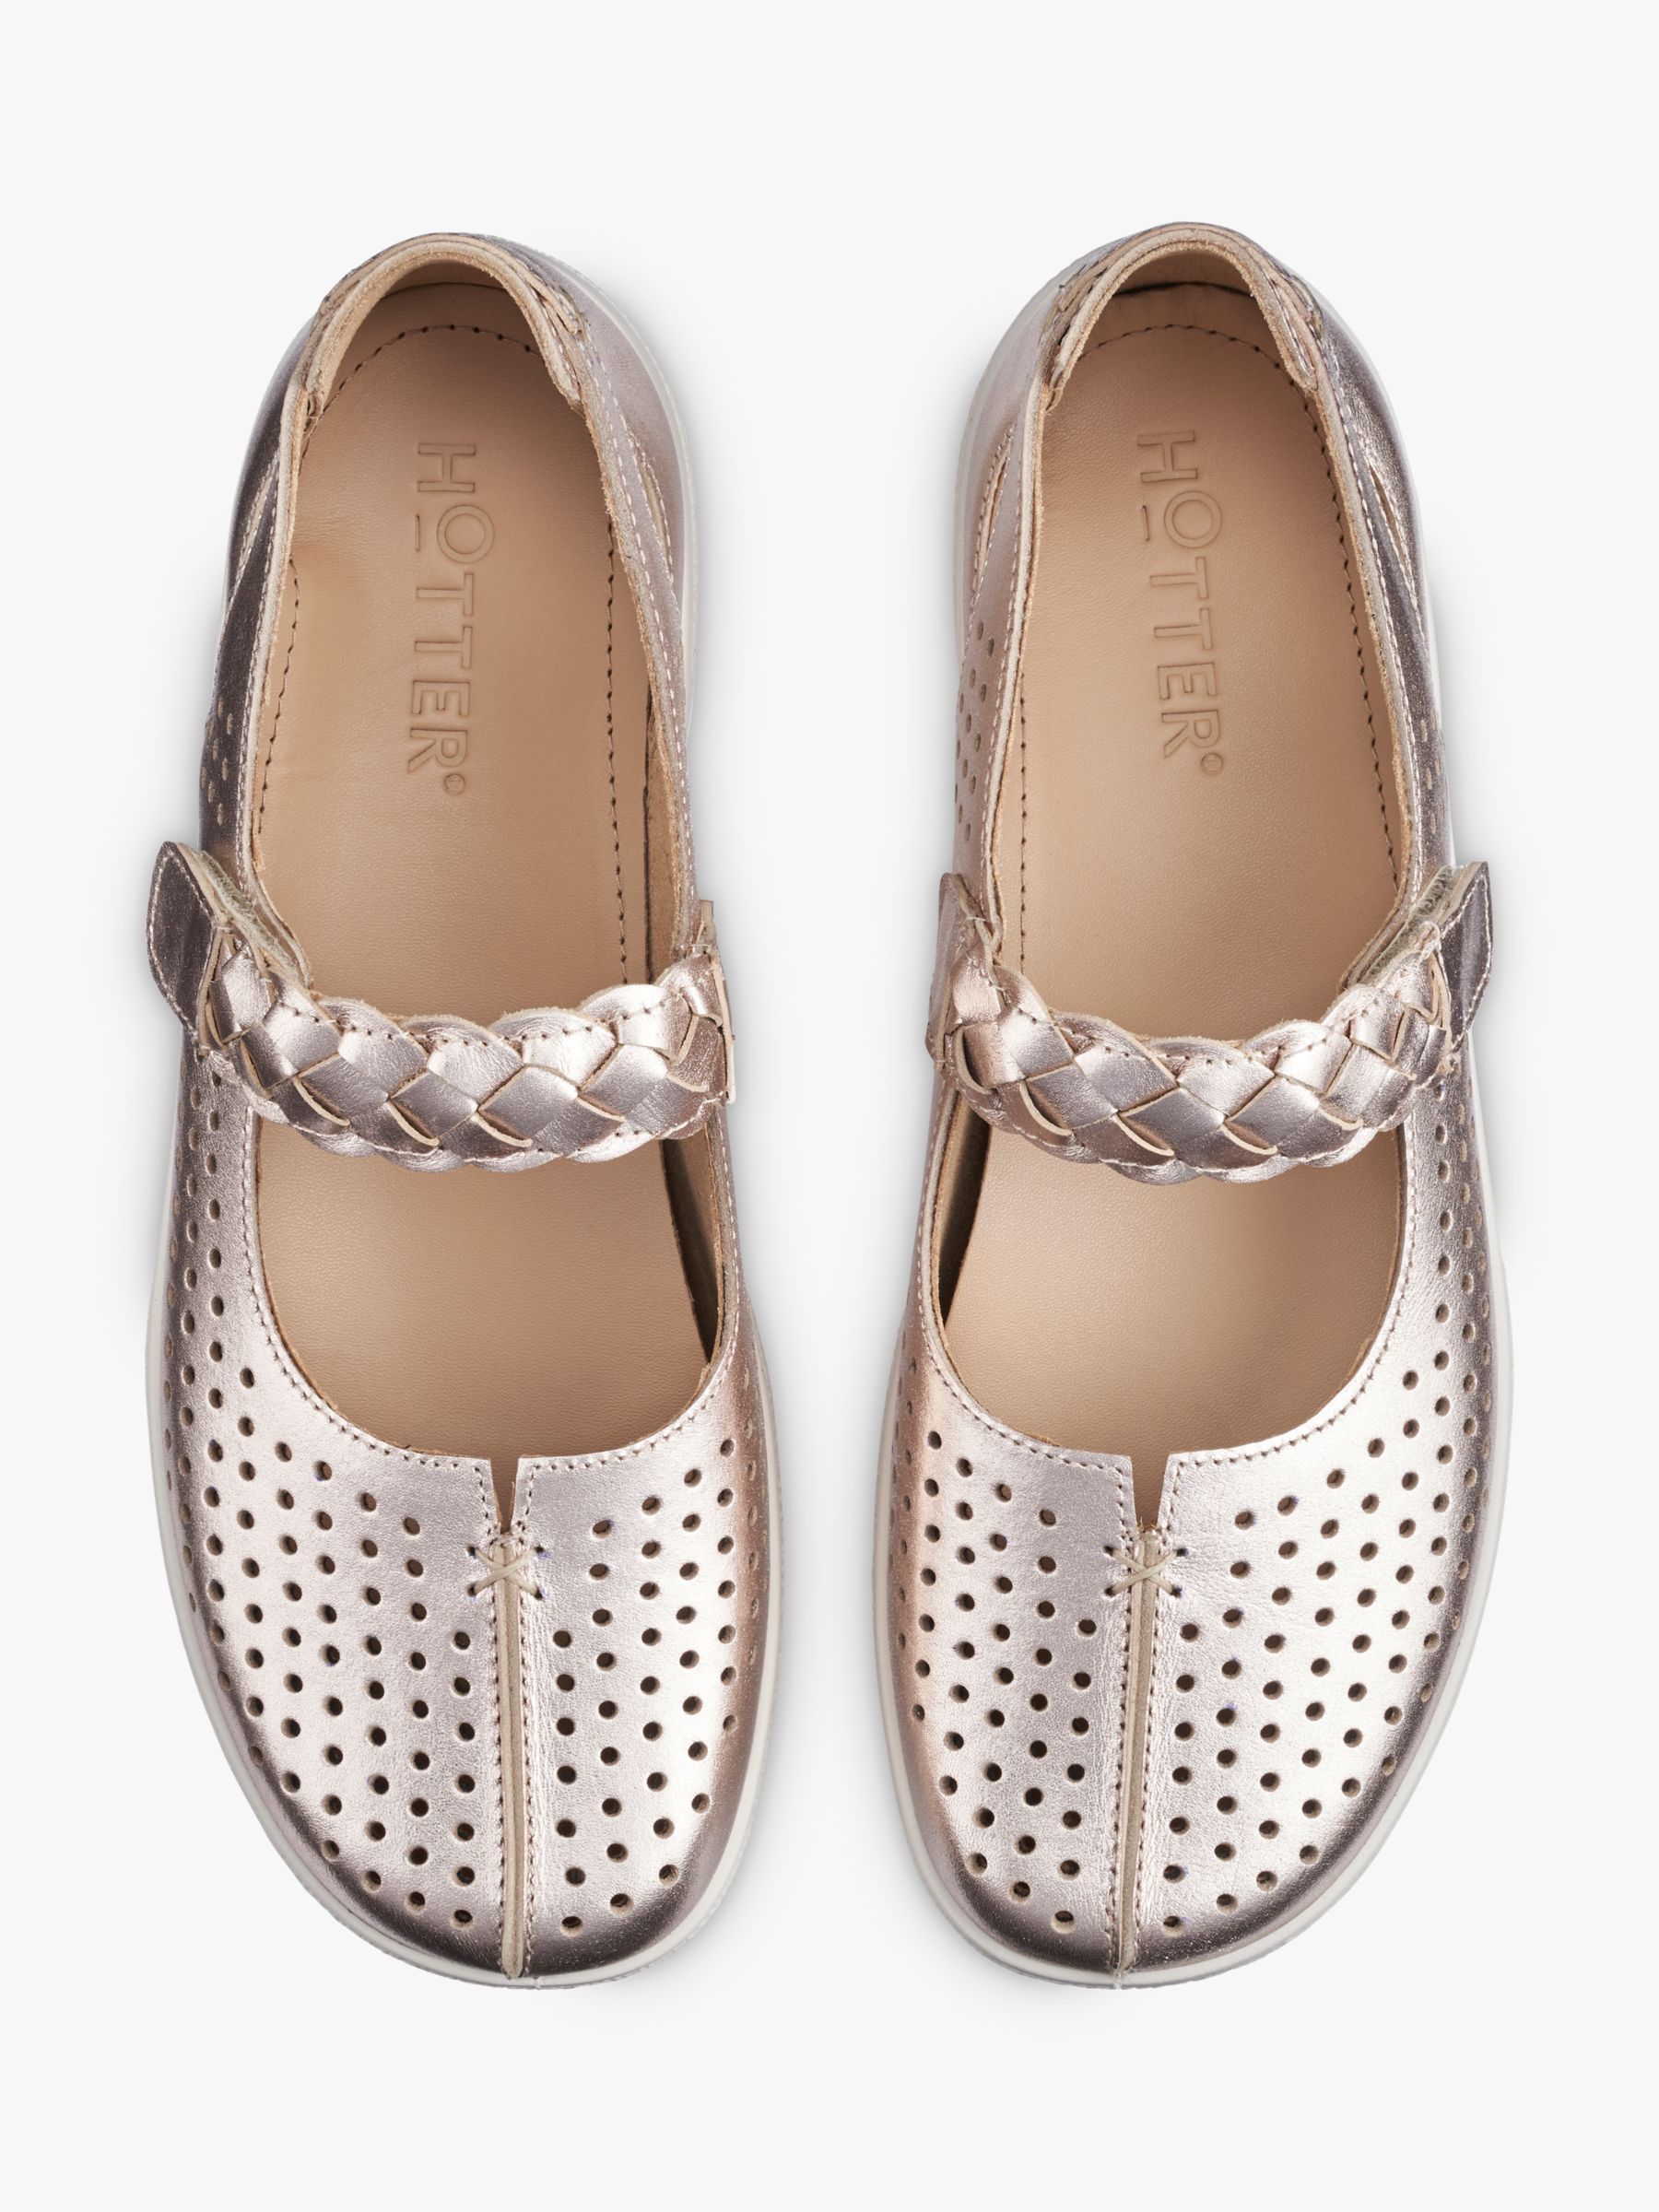 Buy Hotter Quake II Wide Fit Perforated Leather Mary Jane Shoes, Soft Gold Online at johnlewis.com